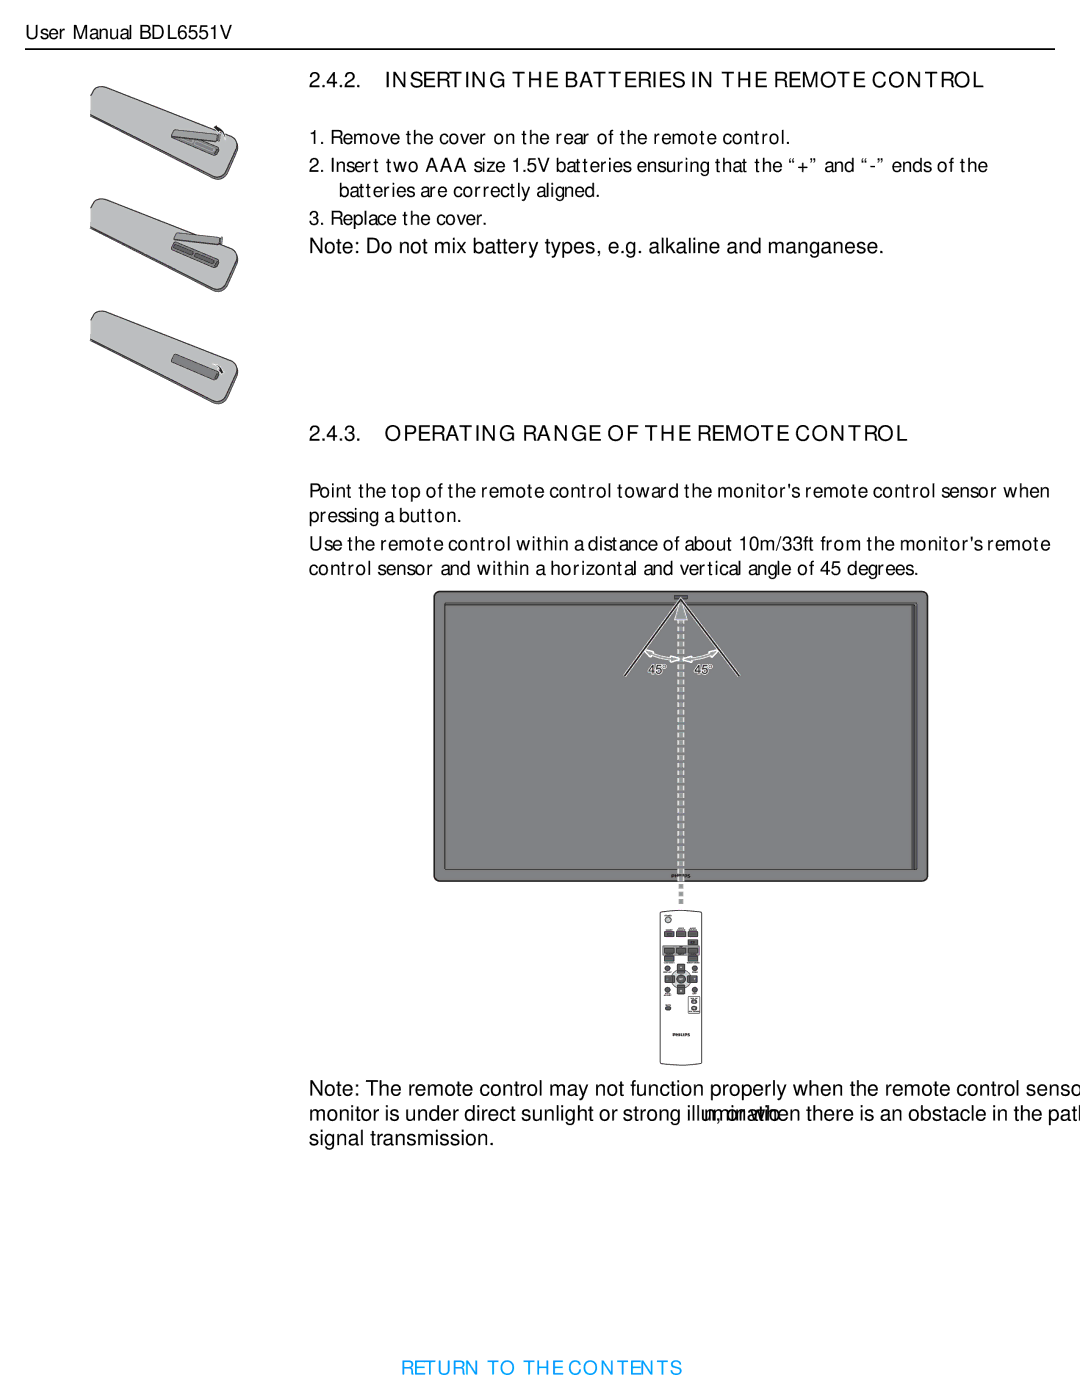 Philips BDL6551V user manual Inserting the Batteries in the Remote Control 